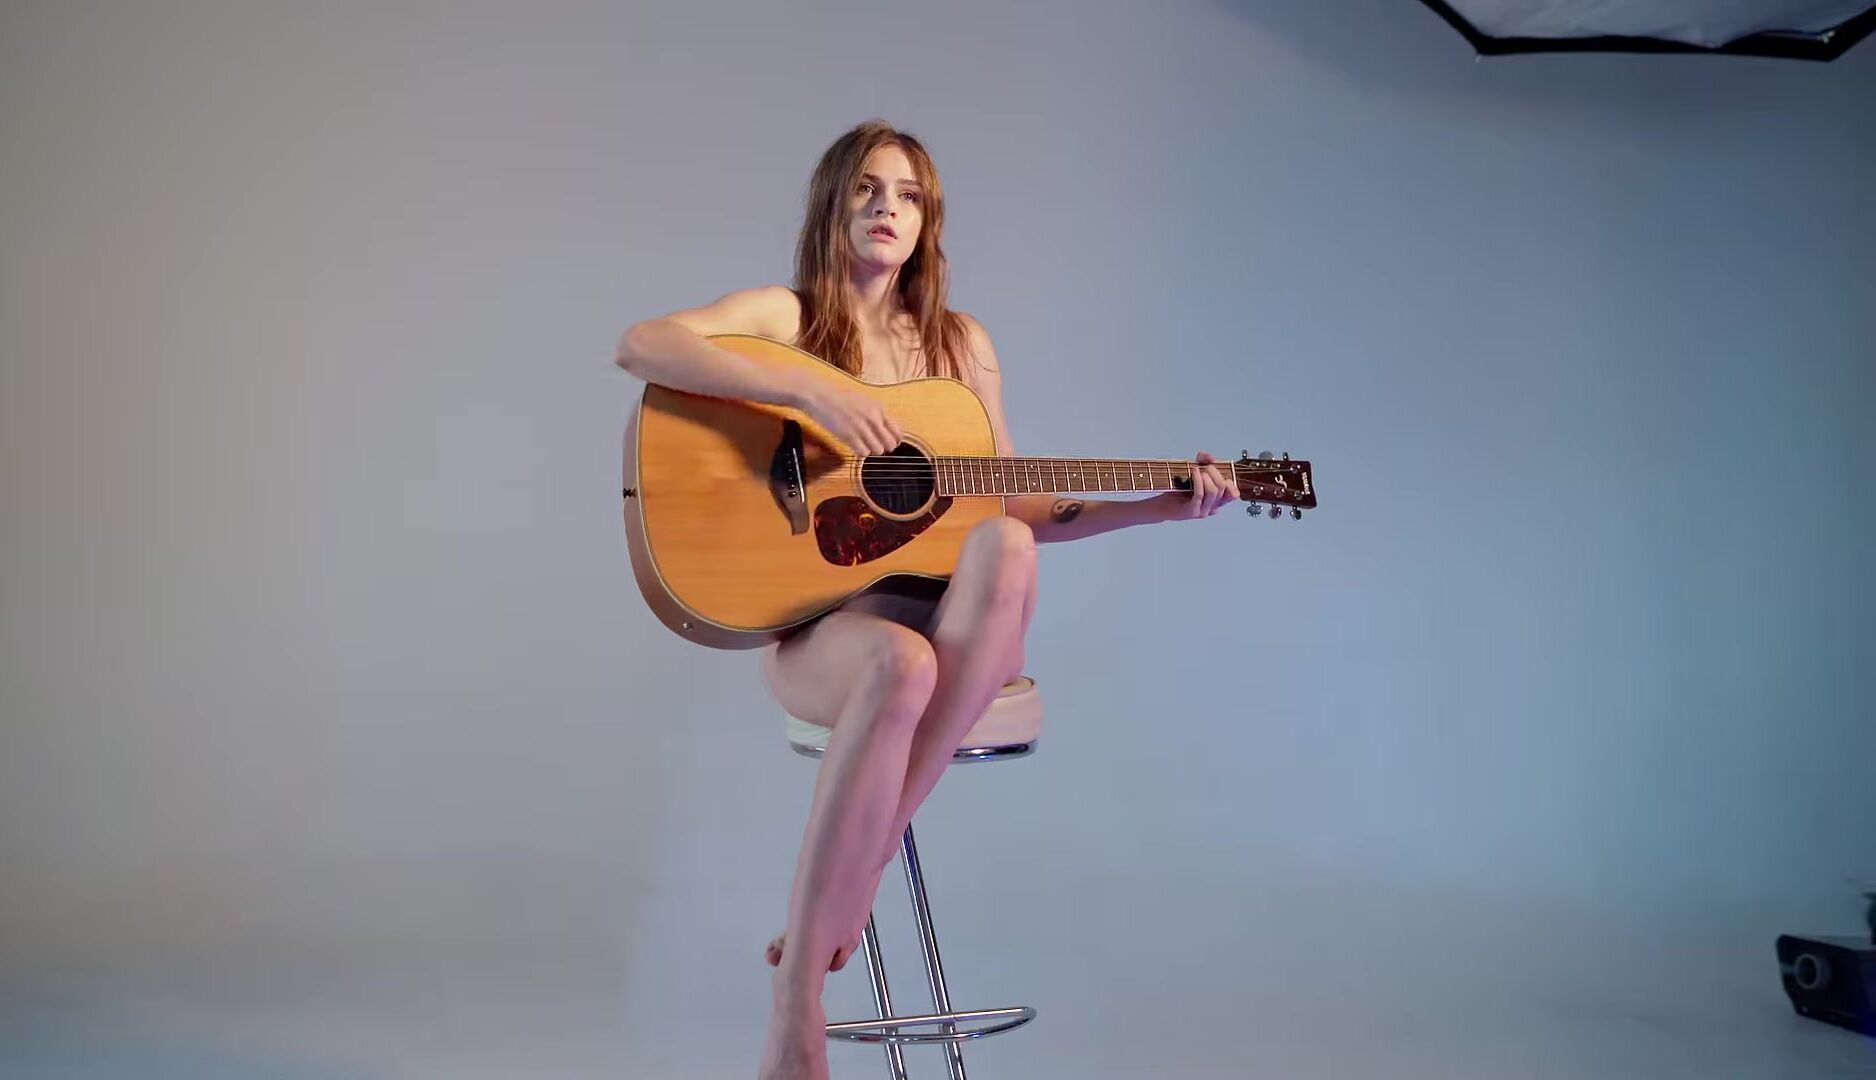 girl posing naked with a guitar (music)